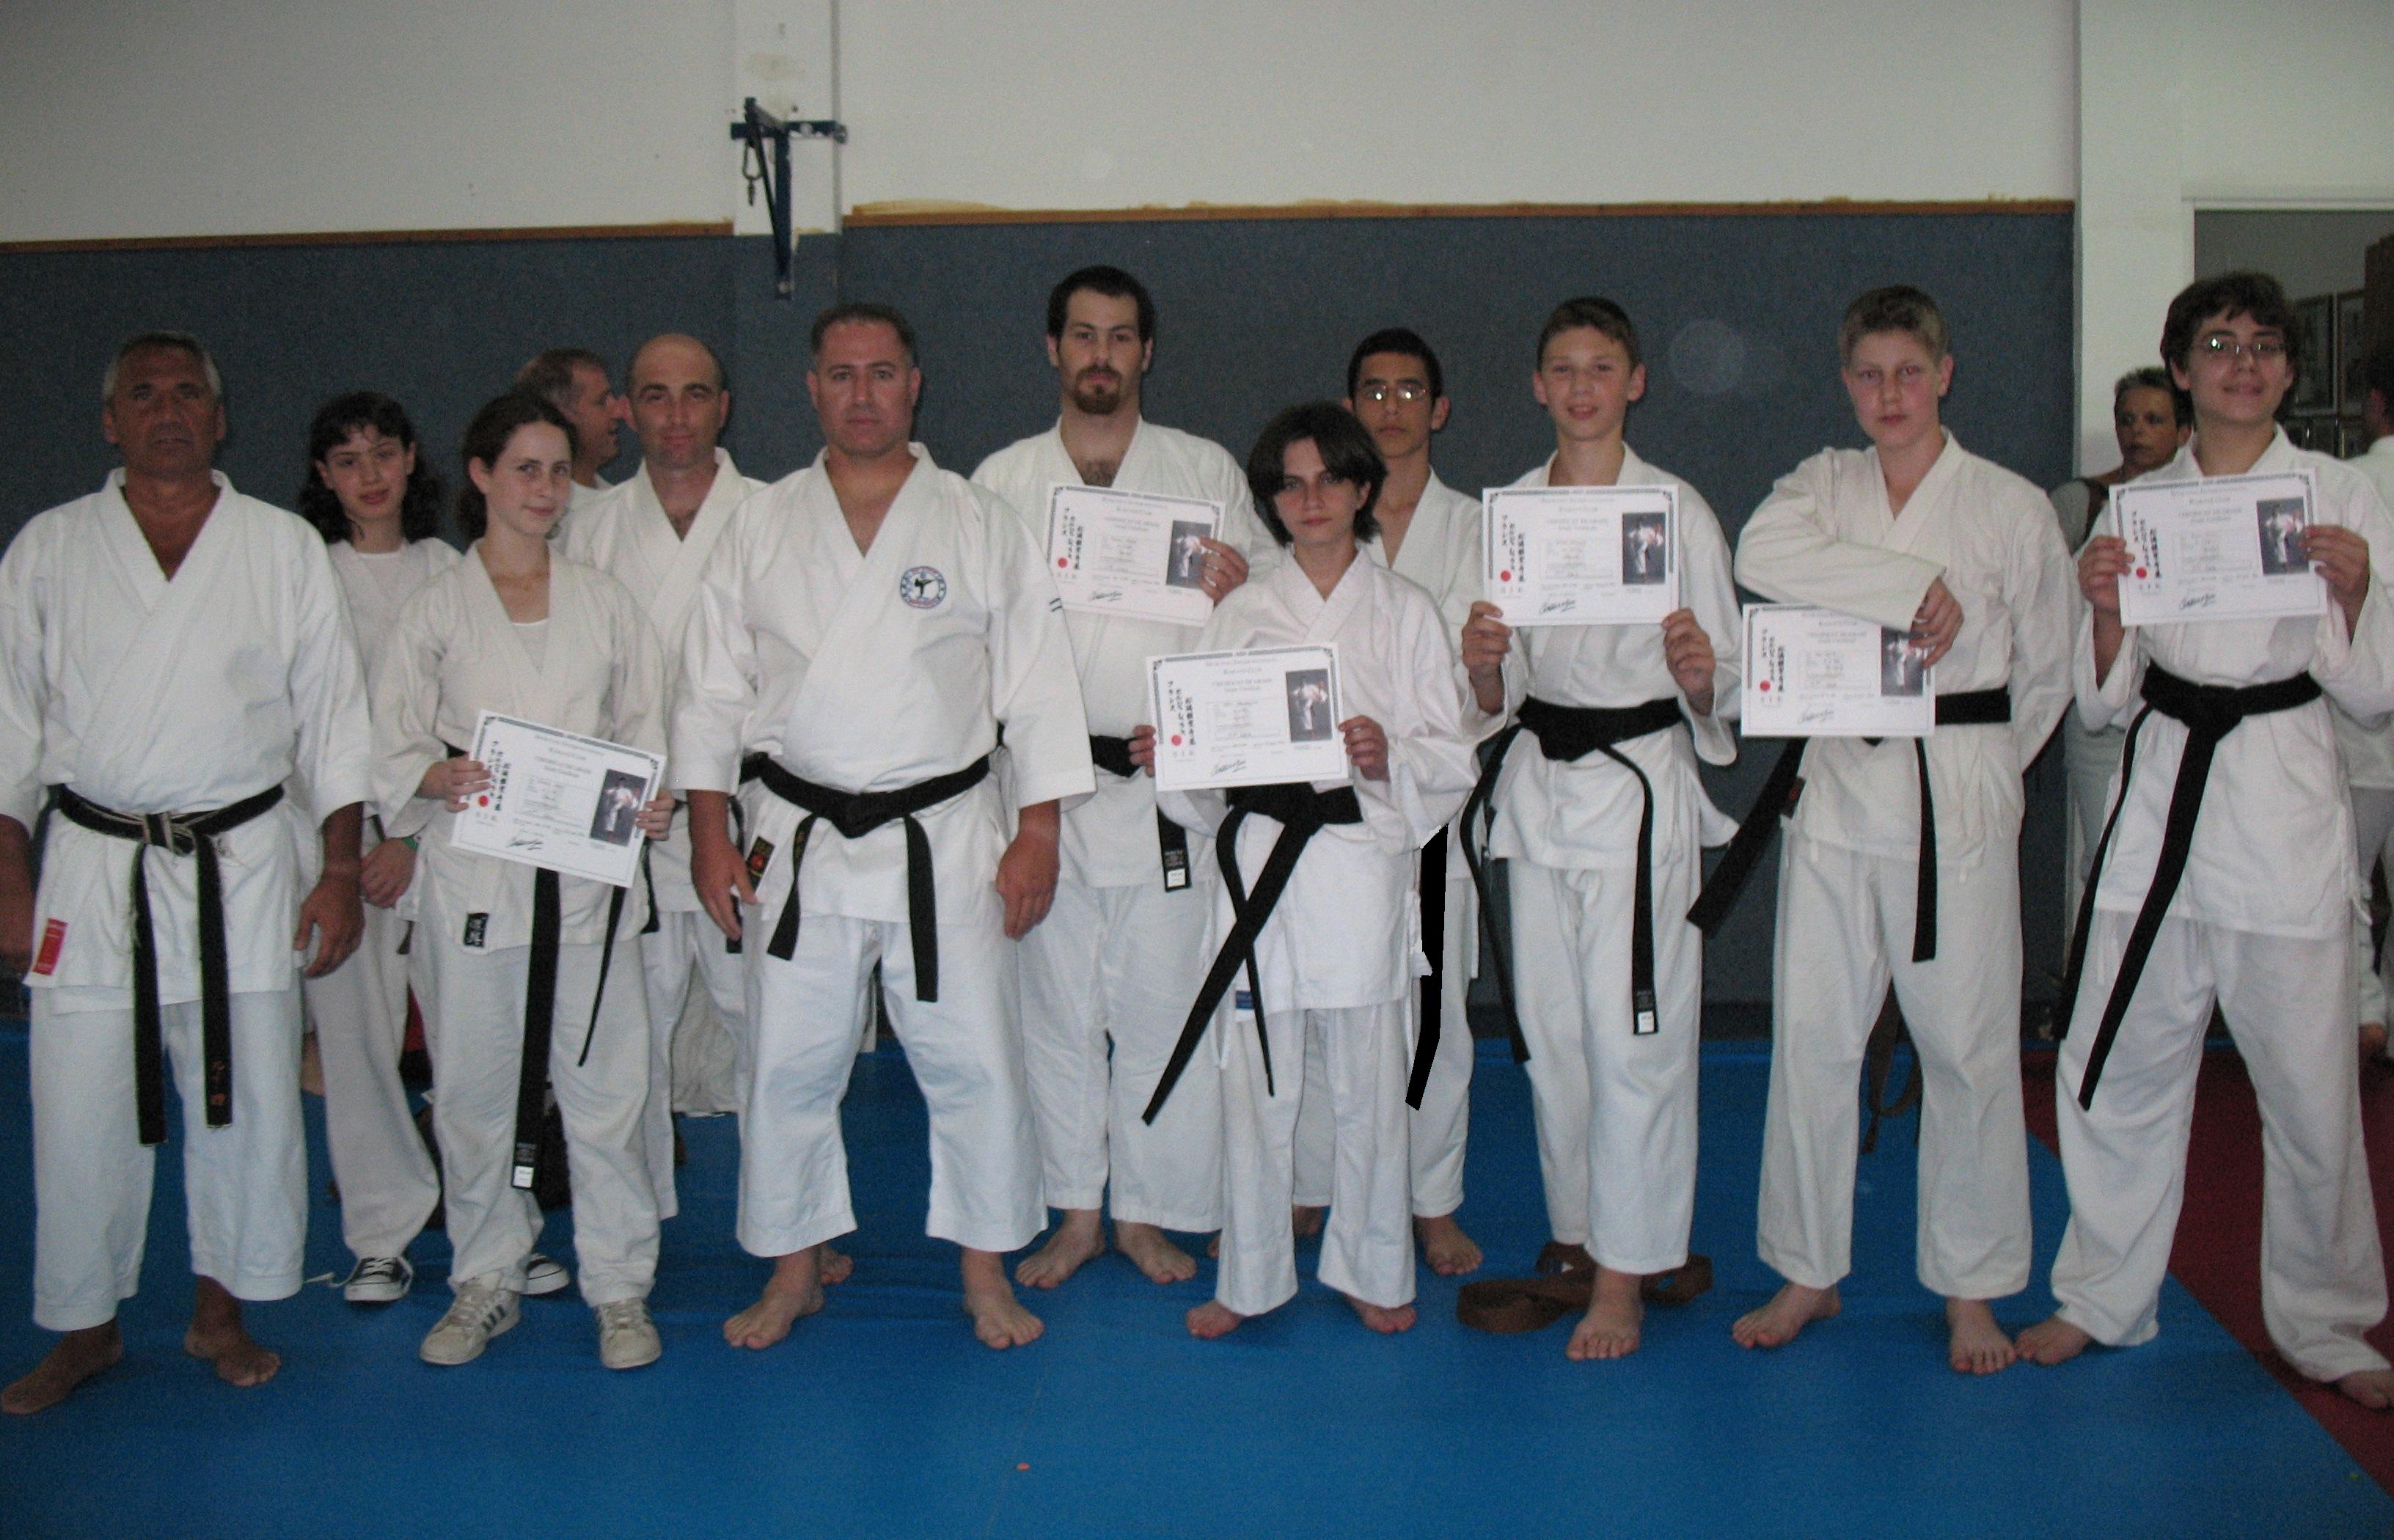 Martial Arts Group Certificate - Teen Rehab